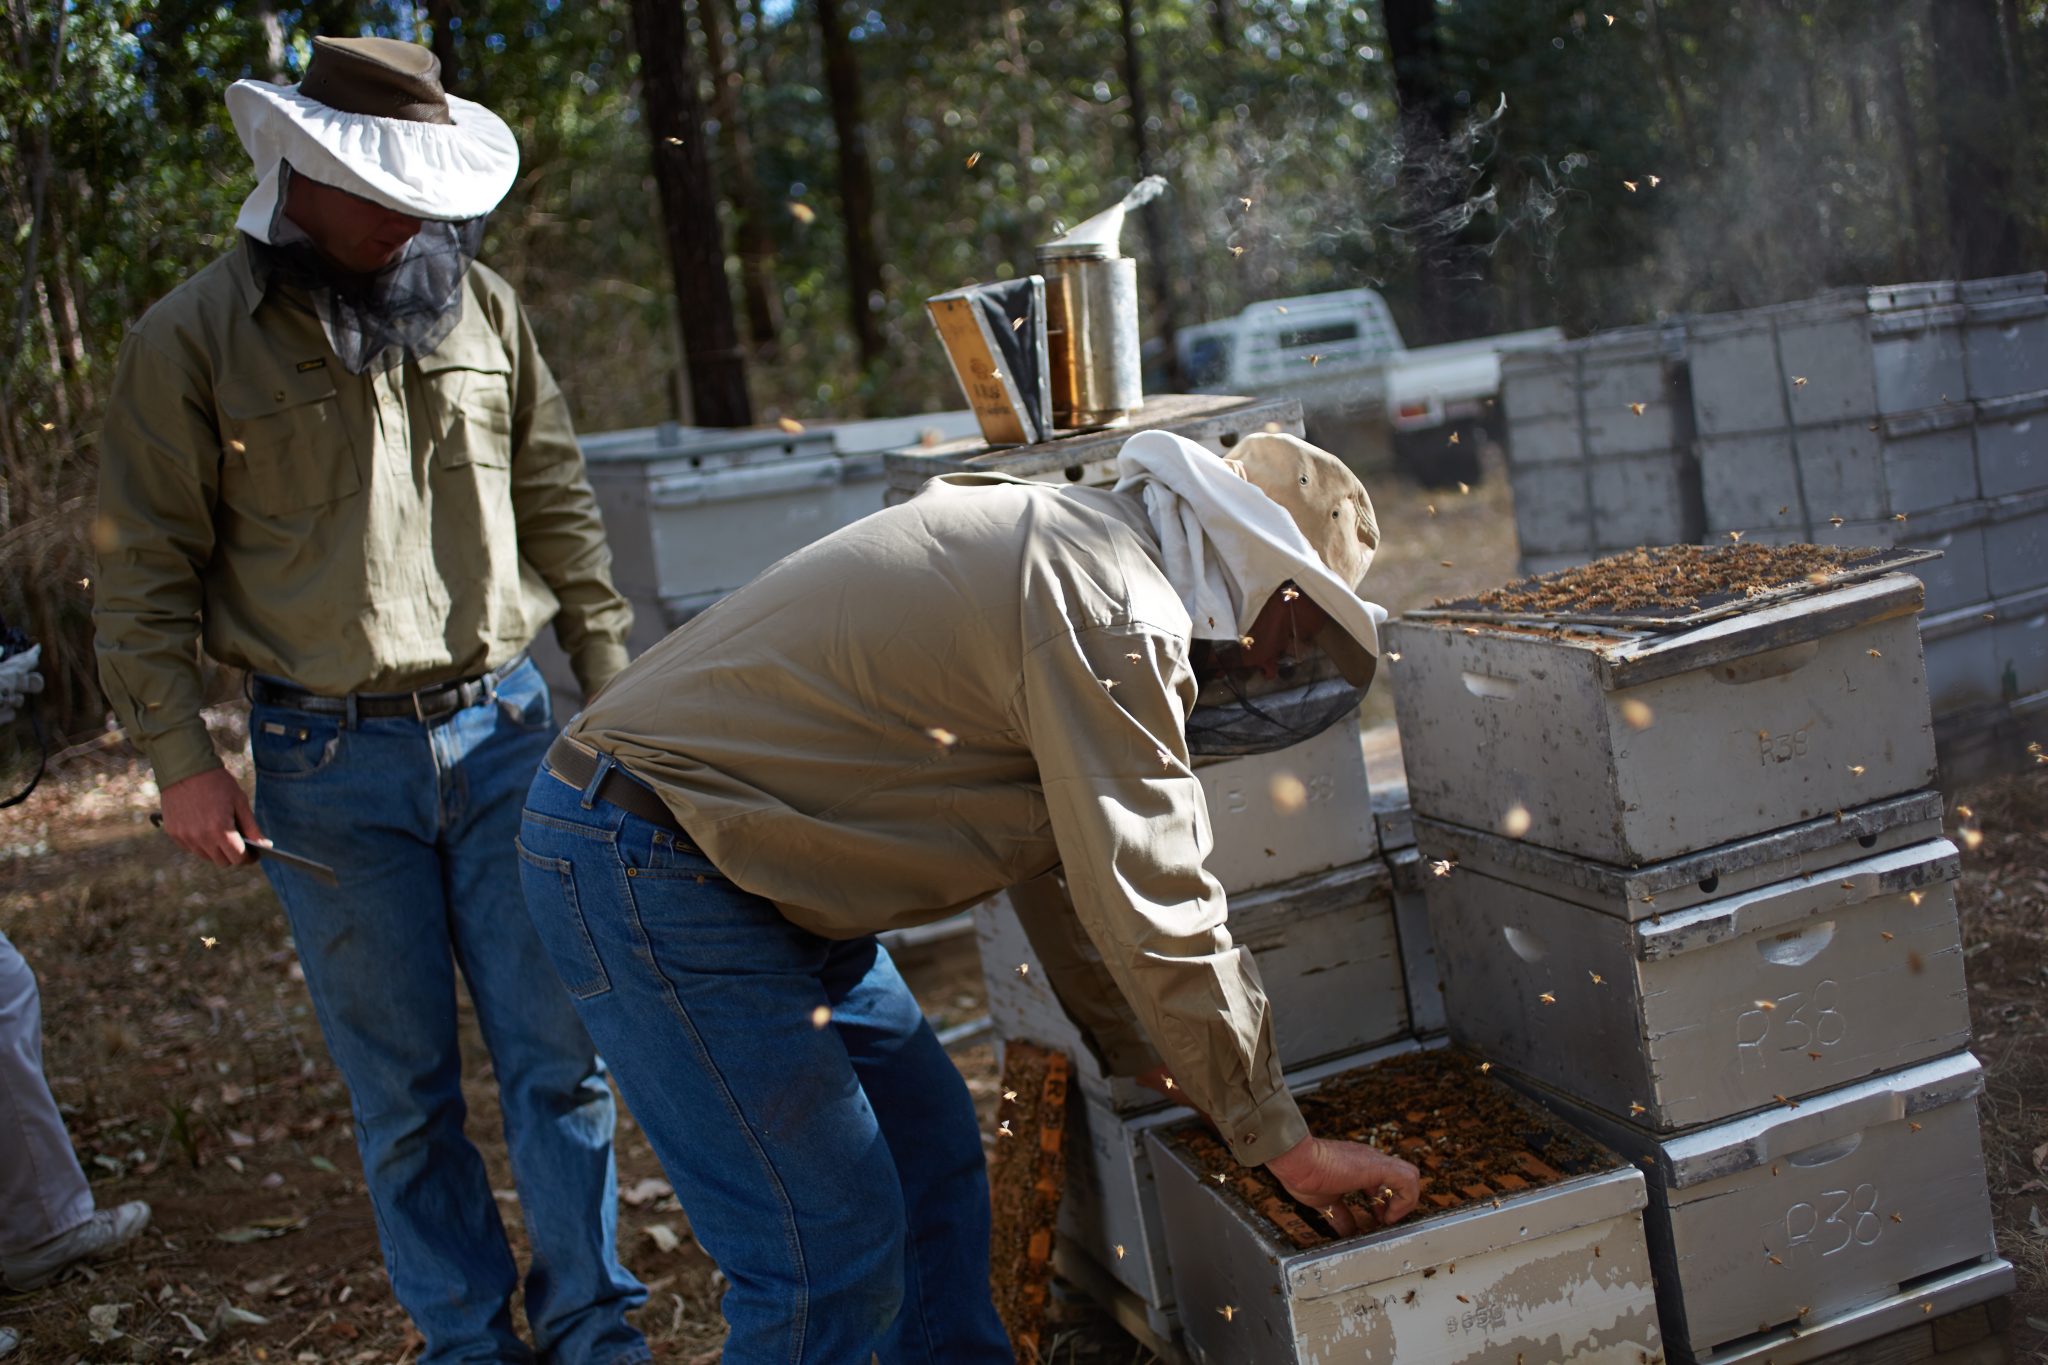 Beekeepers tending to their hives